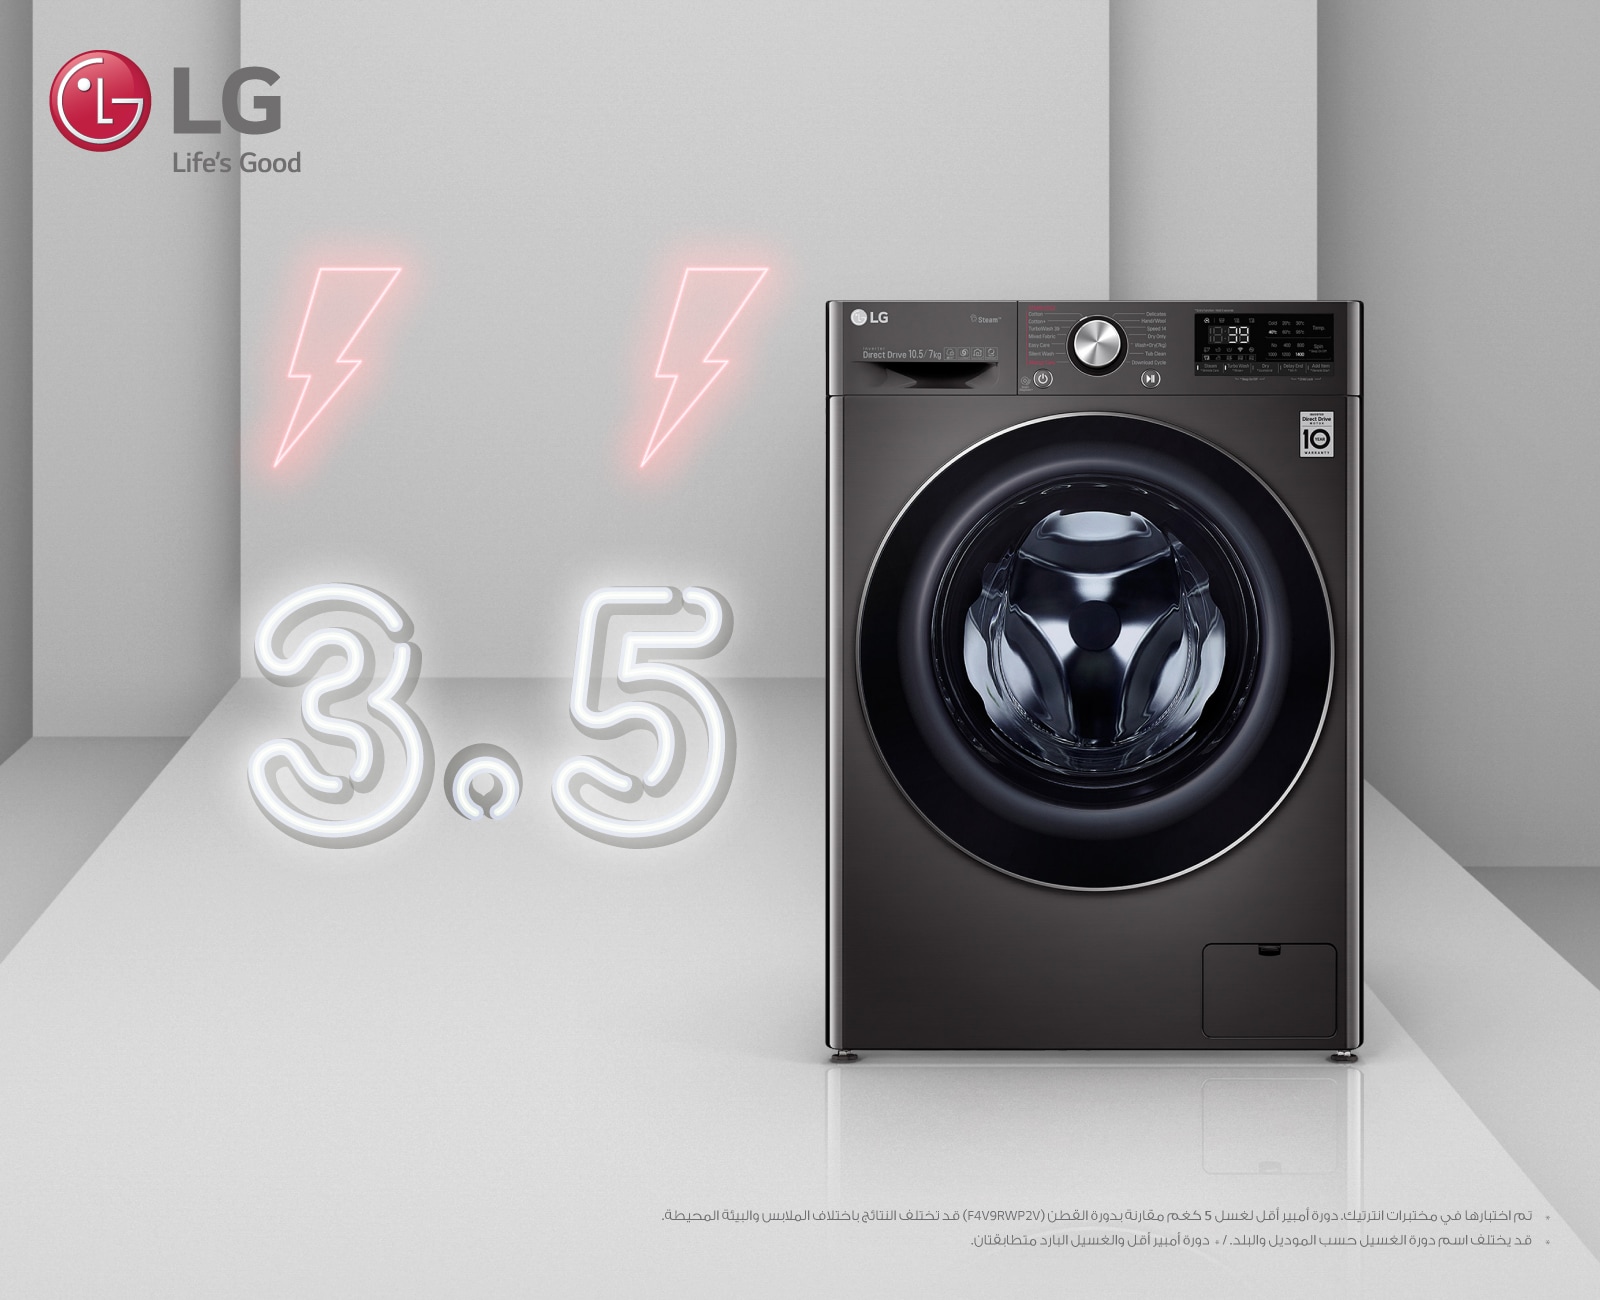 LG-Washer_Dryer-Web-Banners-Without-Text_1600x1300-WM